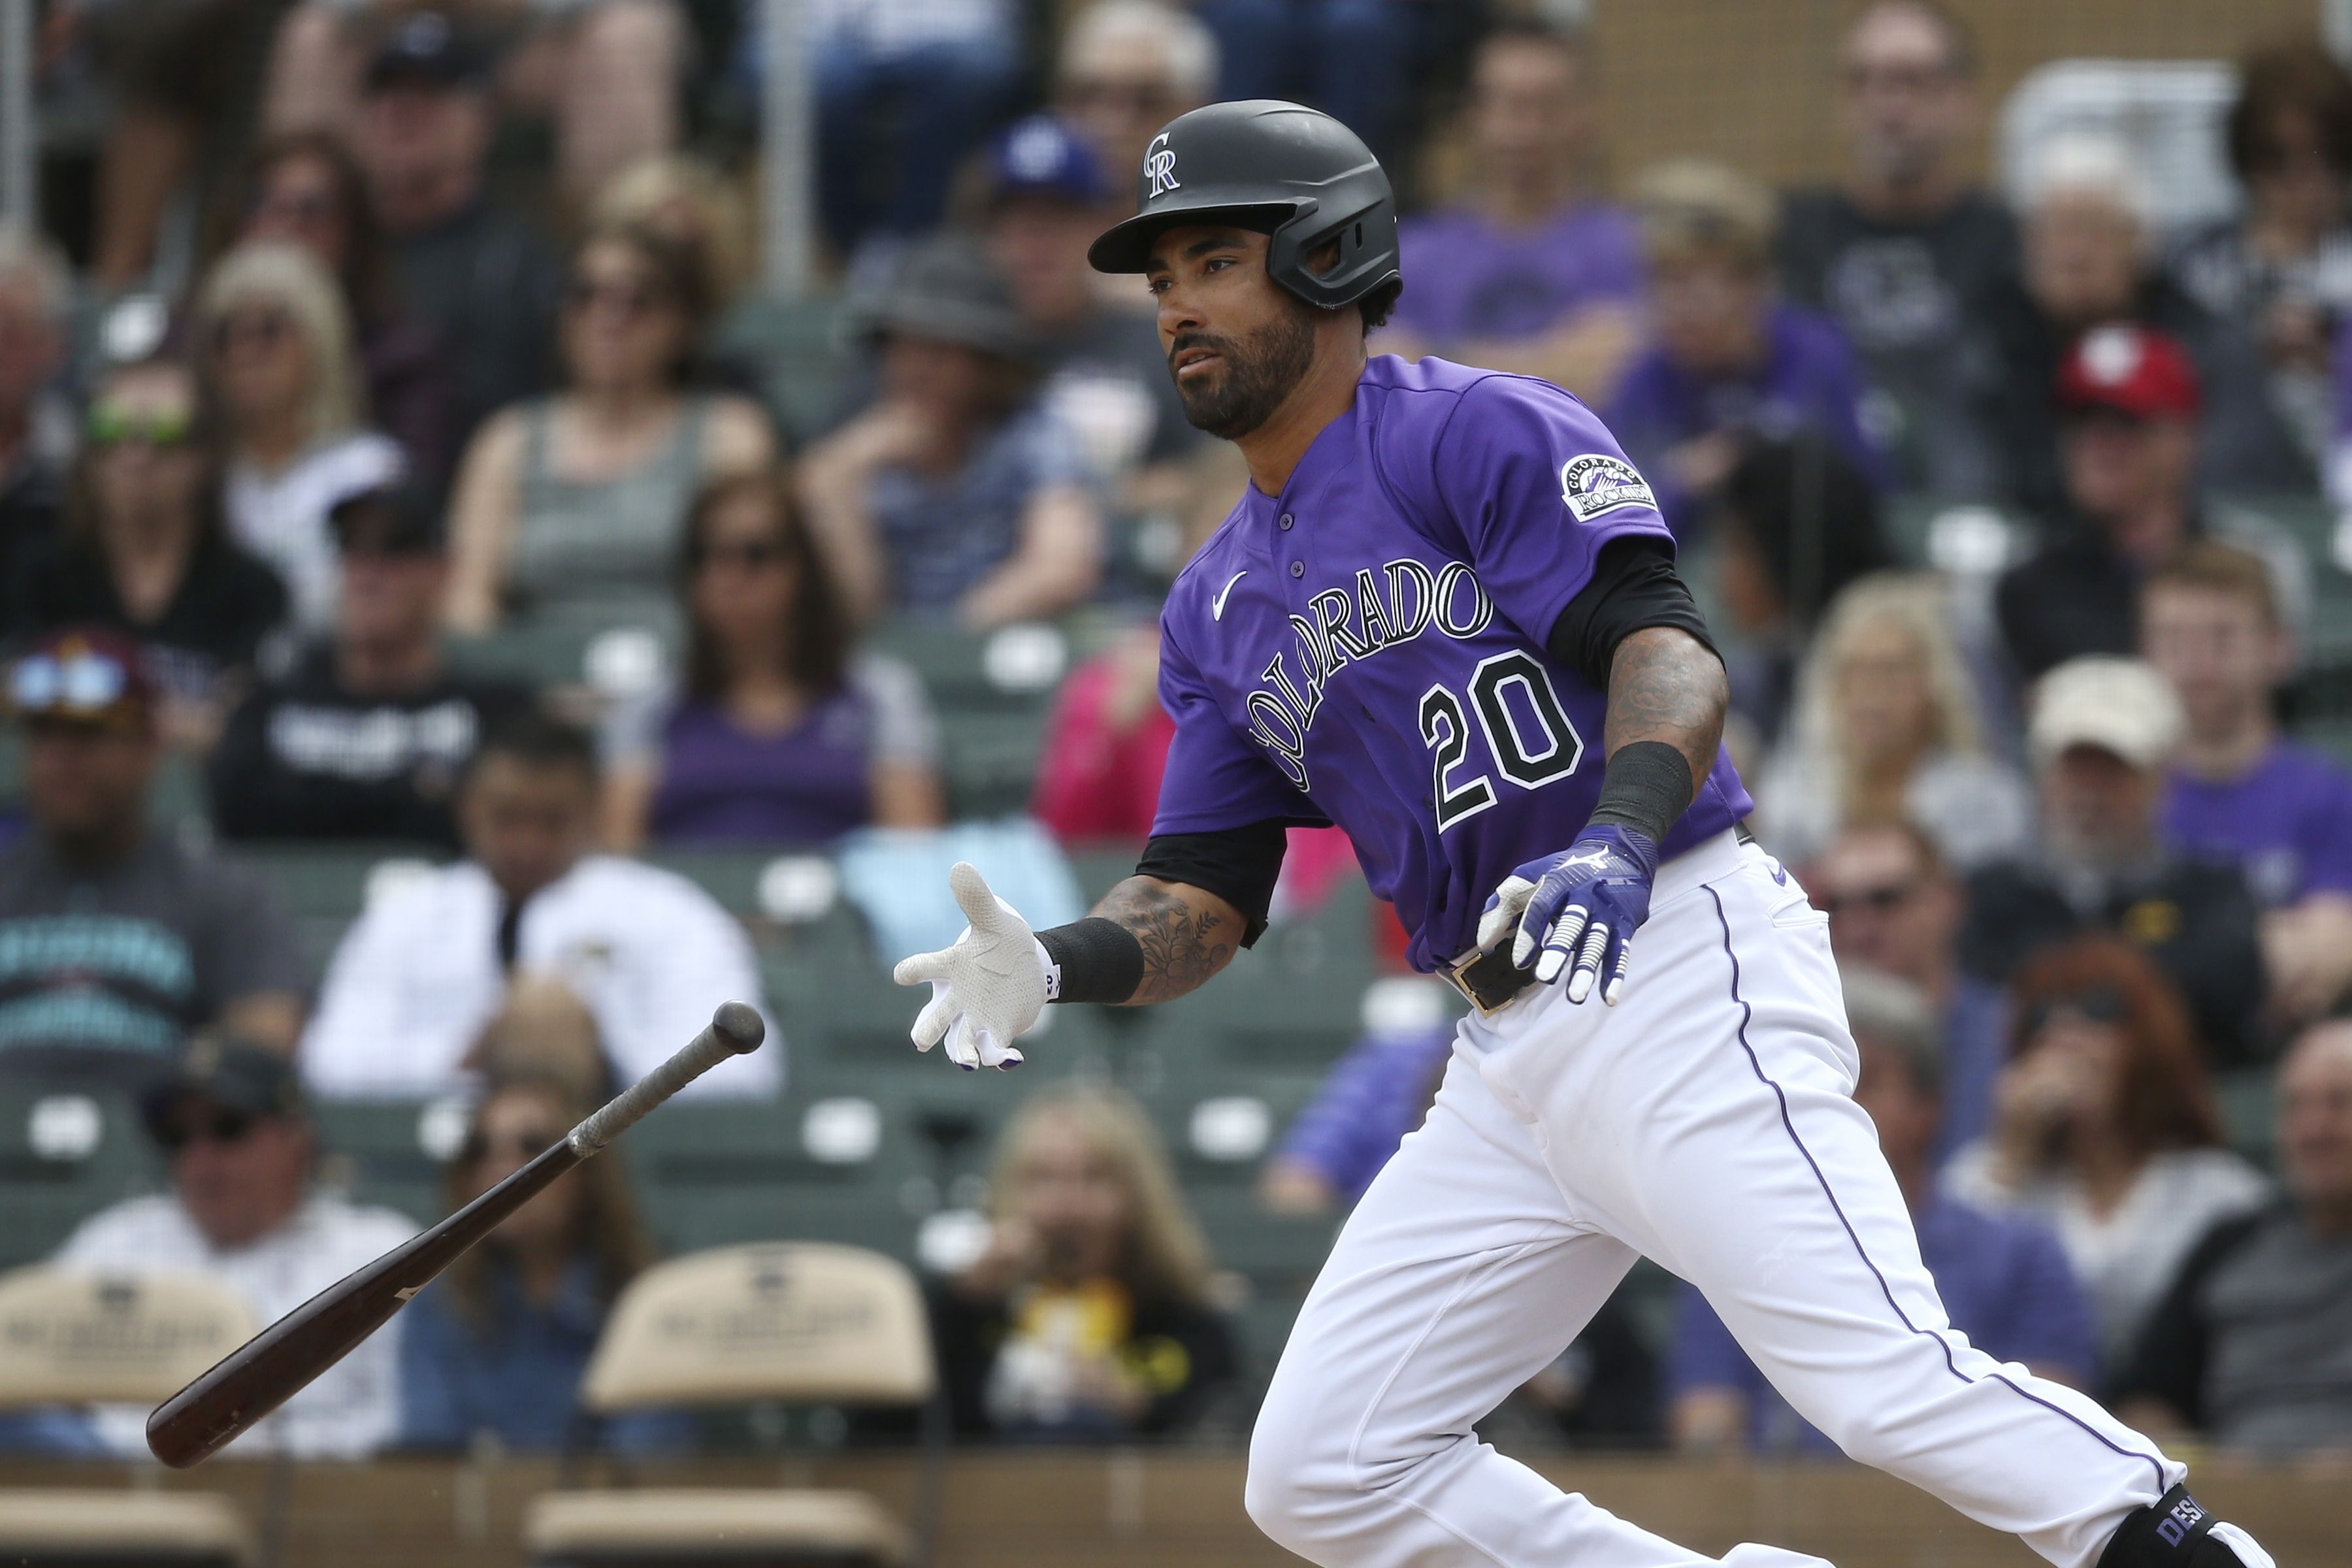 Rockies' Ian Desmond to sit out season for family, help youth